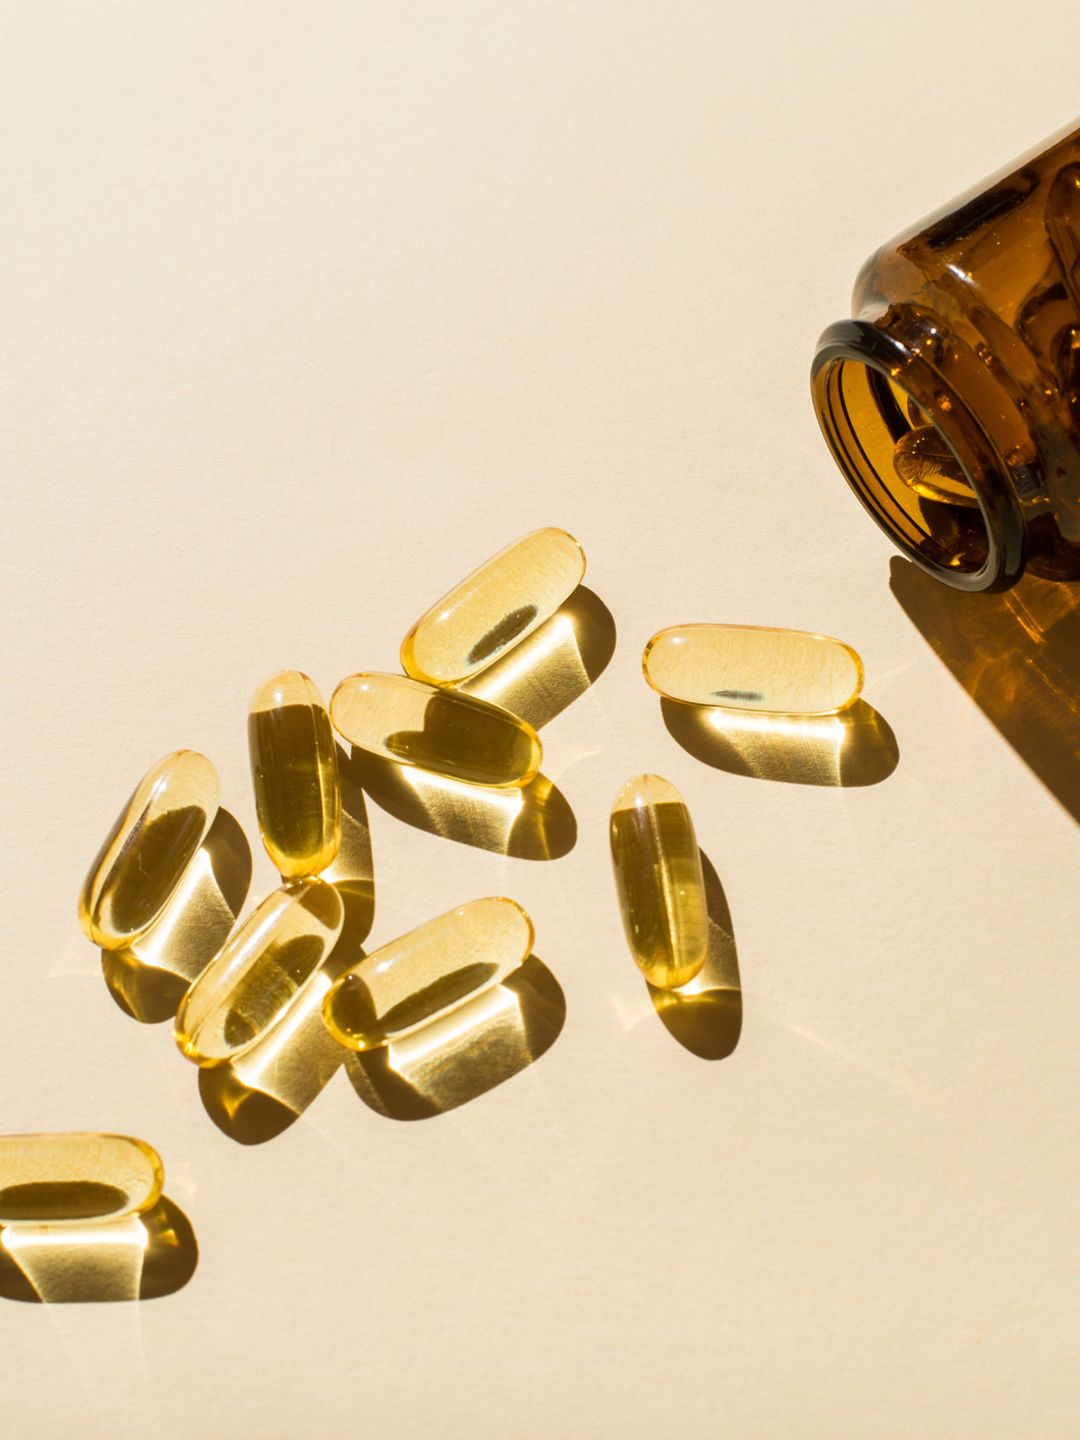 Taking Vitamin D is recommended to safeguard against future health issues